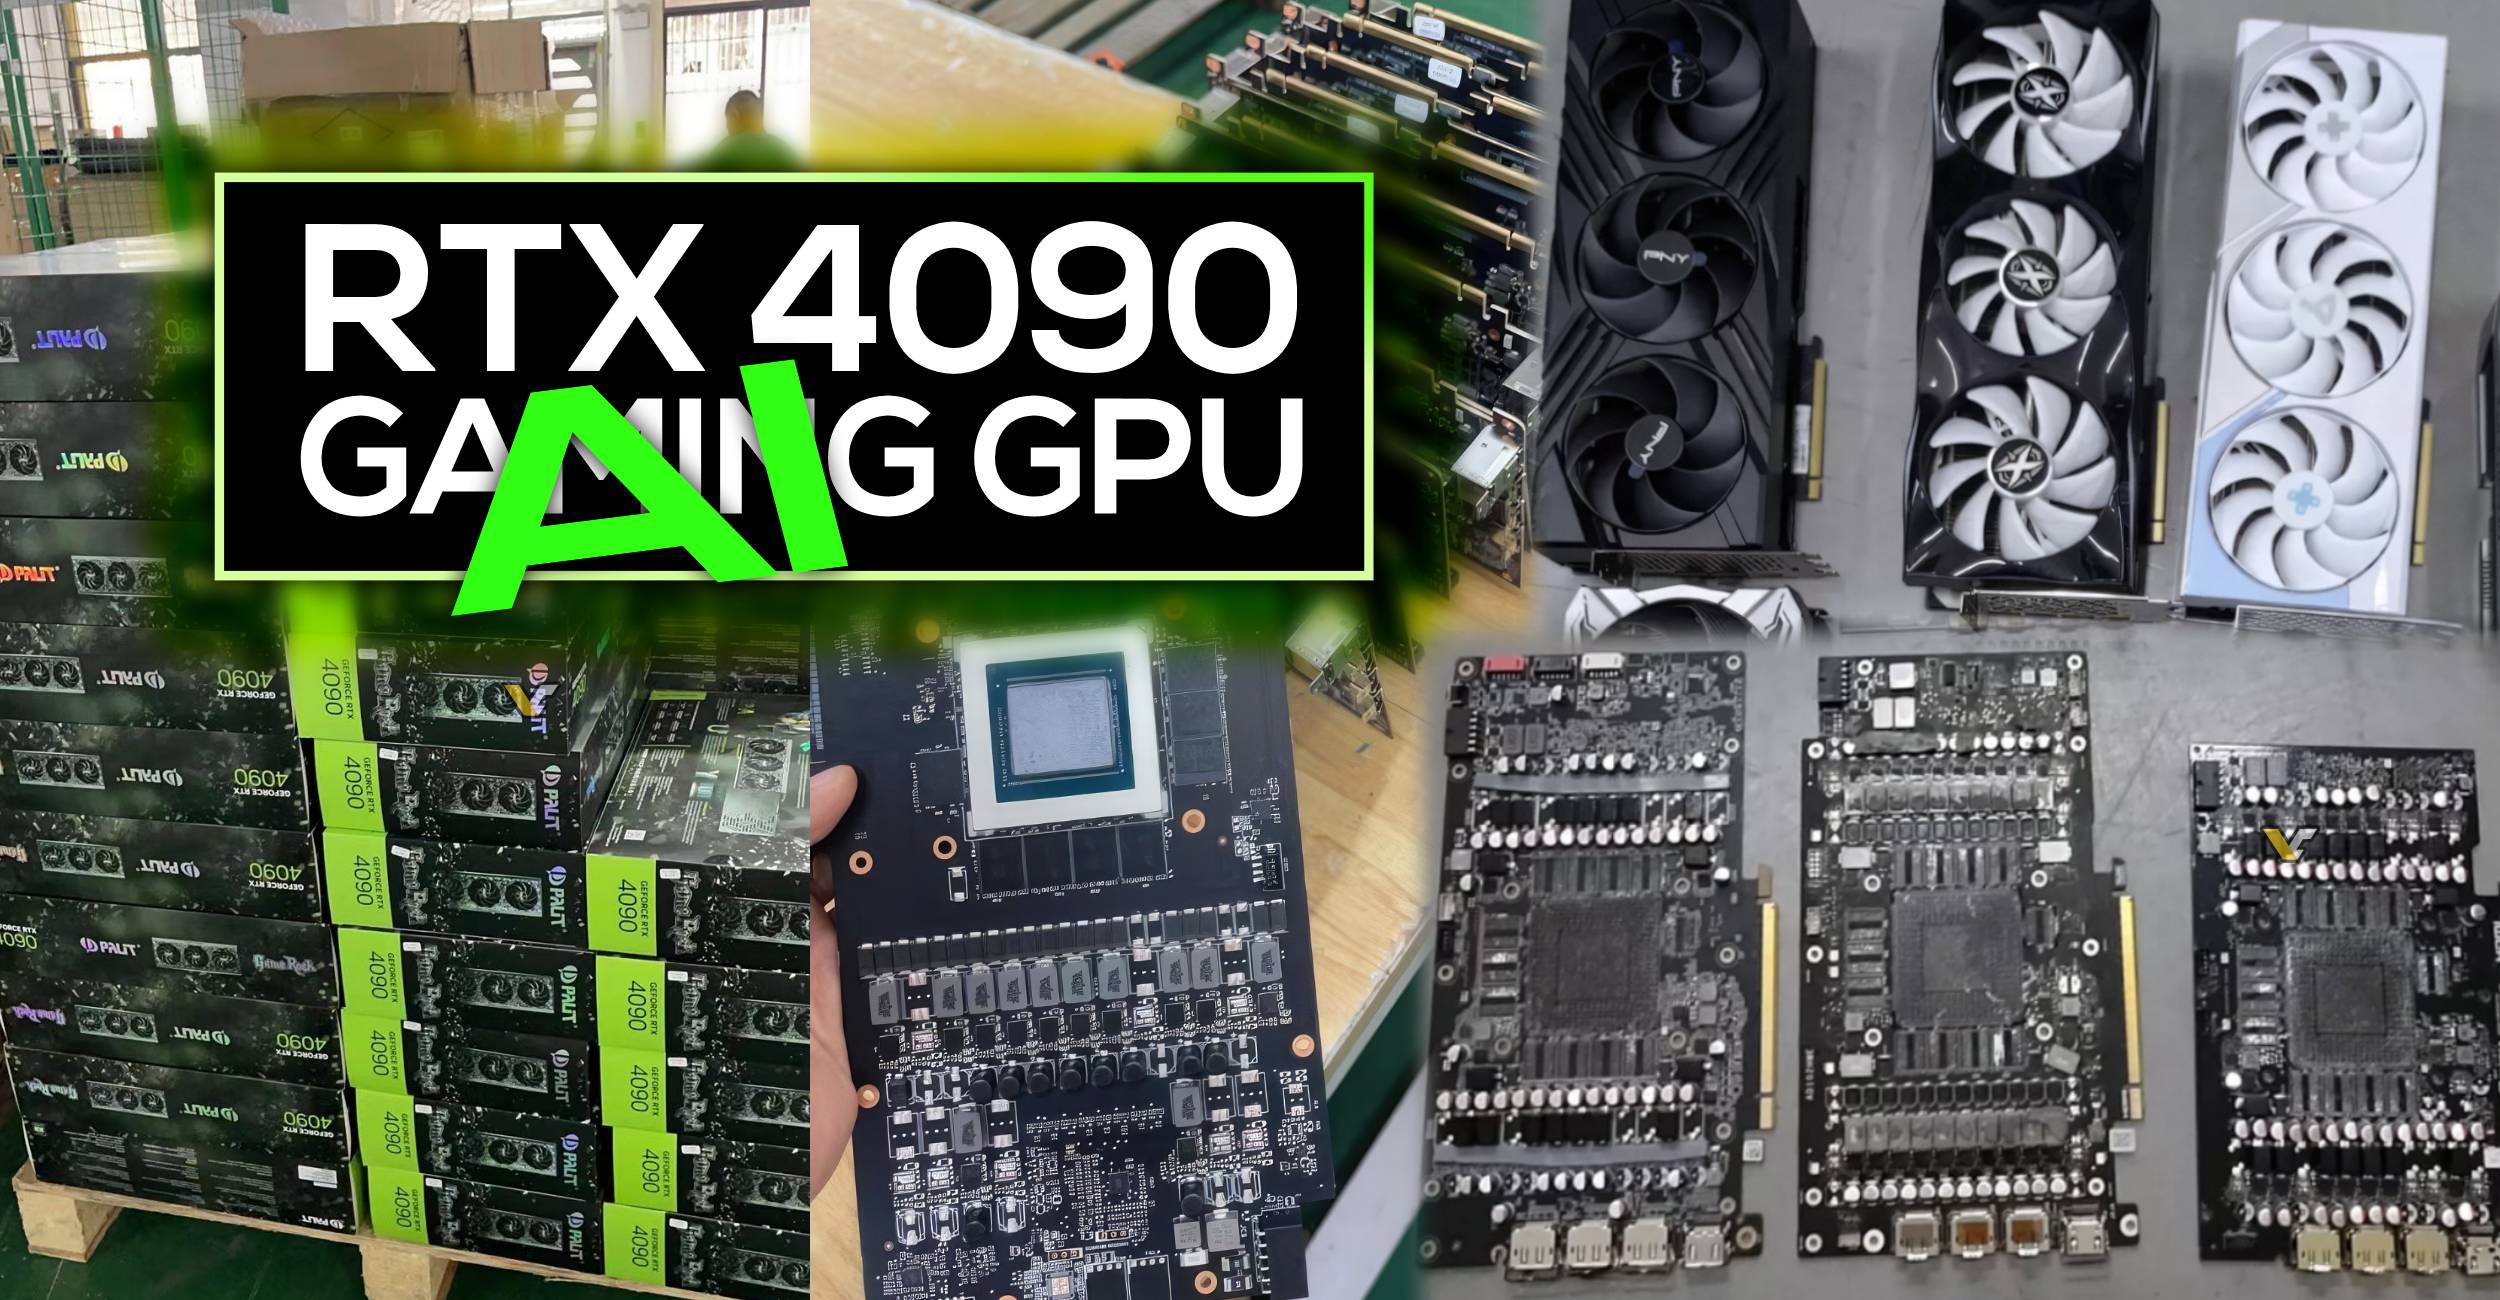 “AI craze” sweeps China: banned NVIDIA RTX 4090 GPUs dismantled en masse by Chinese companies for AI card production – VideoCardz.com